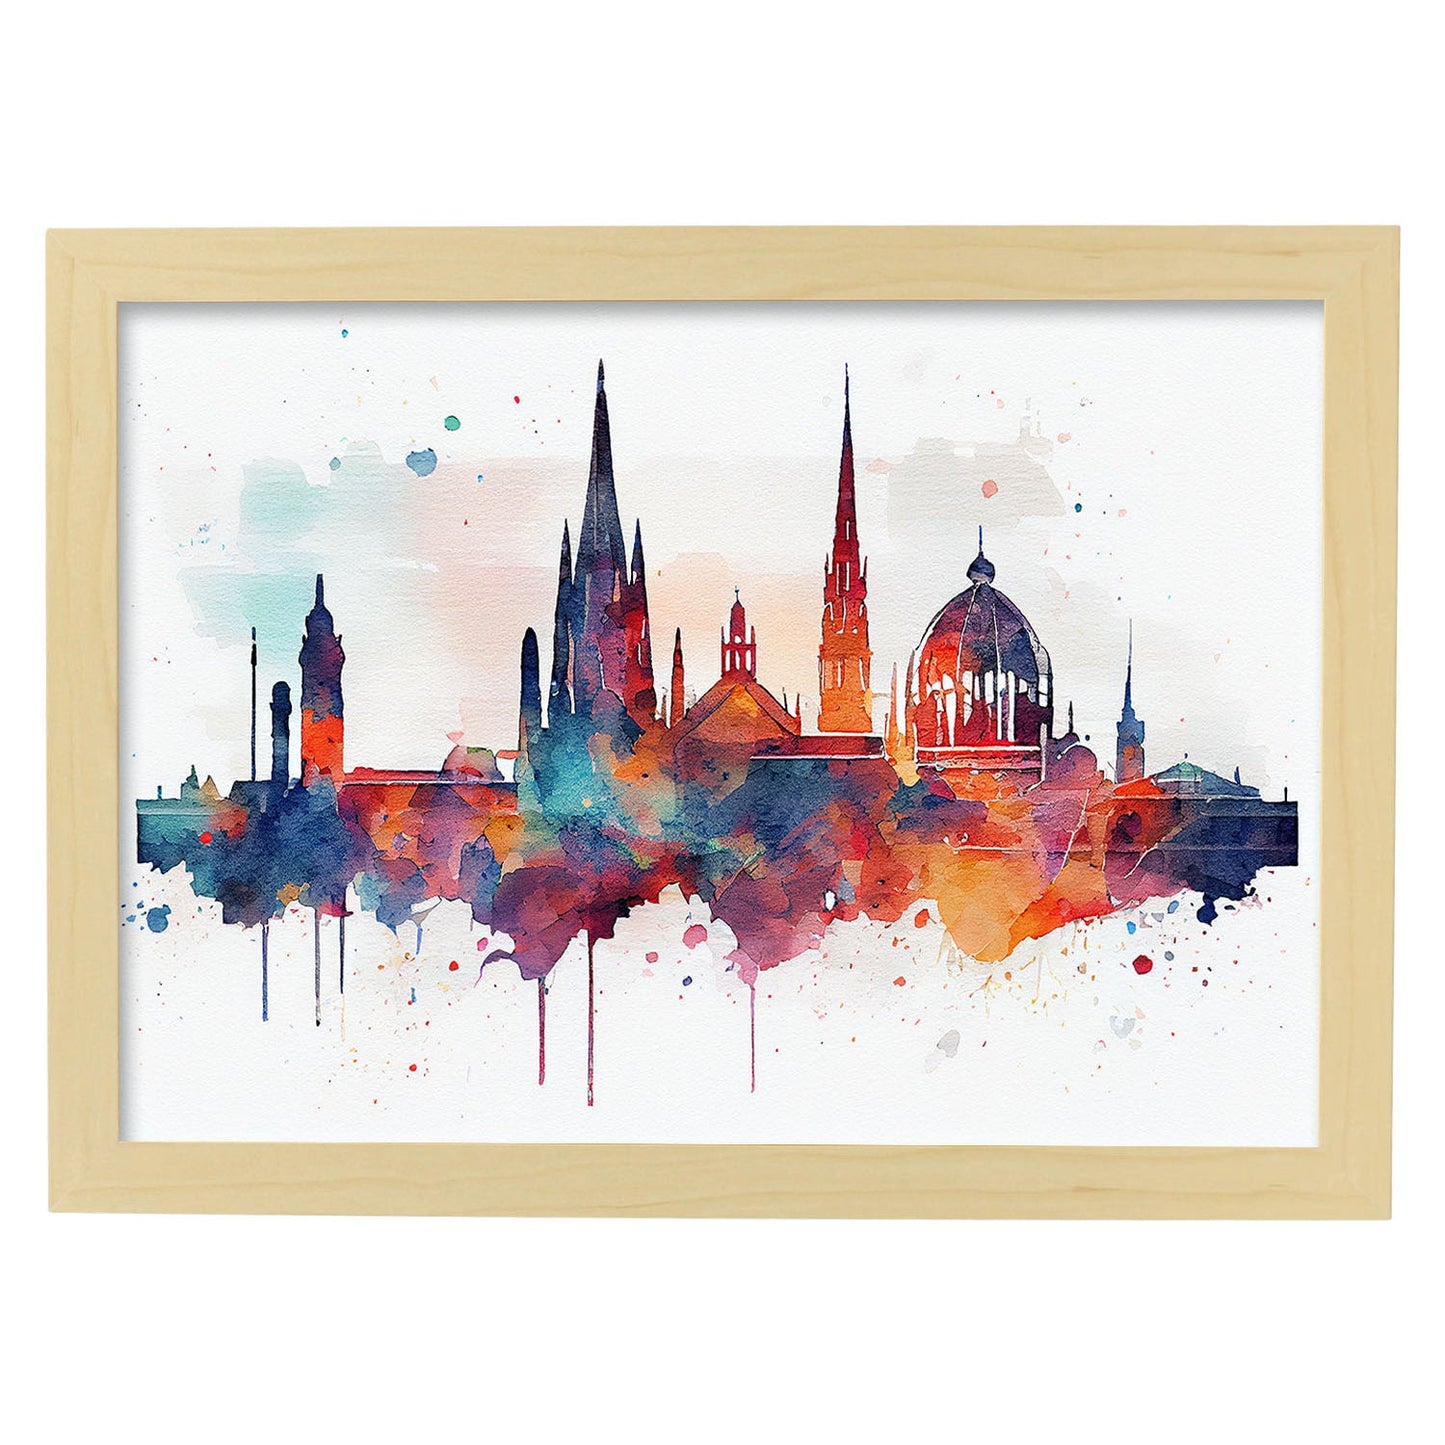 Nacnic watercolor of a skyline of the city of Vienna_2. Aesthetic Wall Art Prints for Bedroom or Living Room Design.-Artwork-Nacnic-A4-Marco Madera Clara-Nacnic Estudio SL